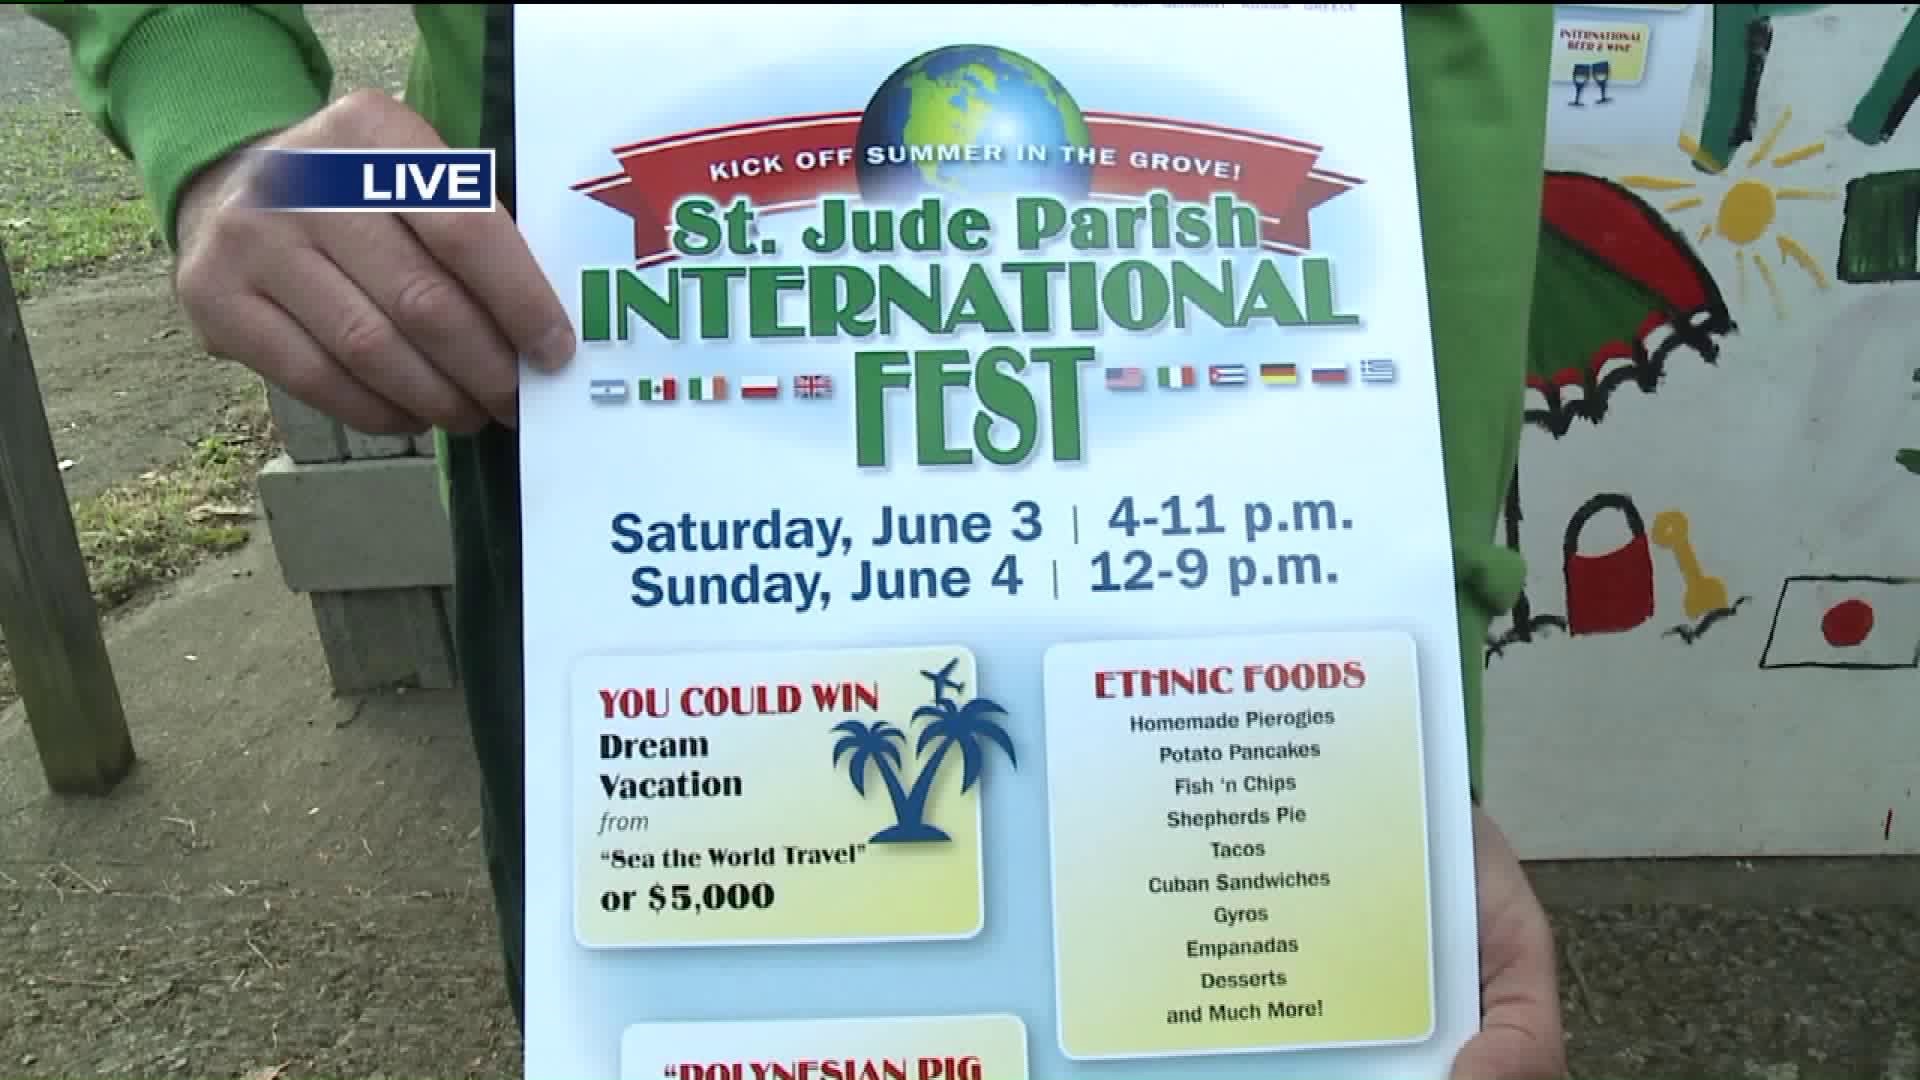 Church Gears up for International Fest in Luzerne County